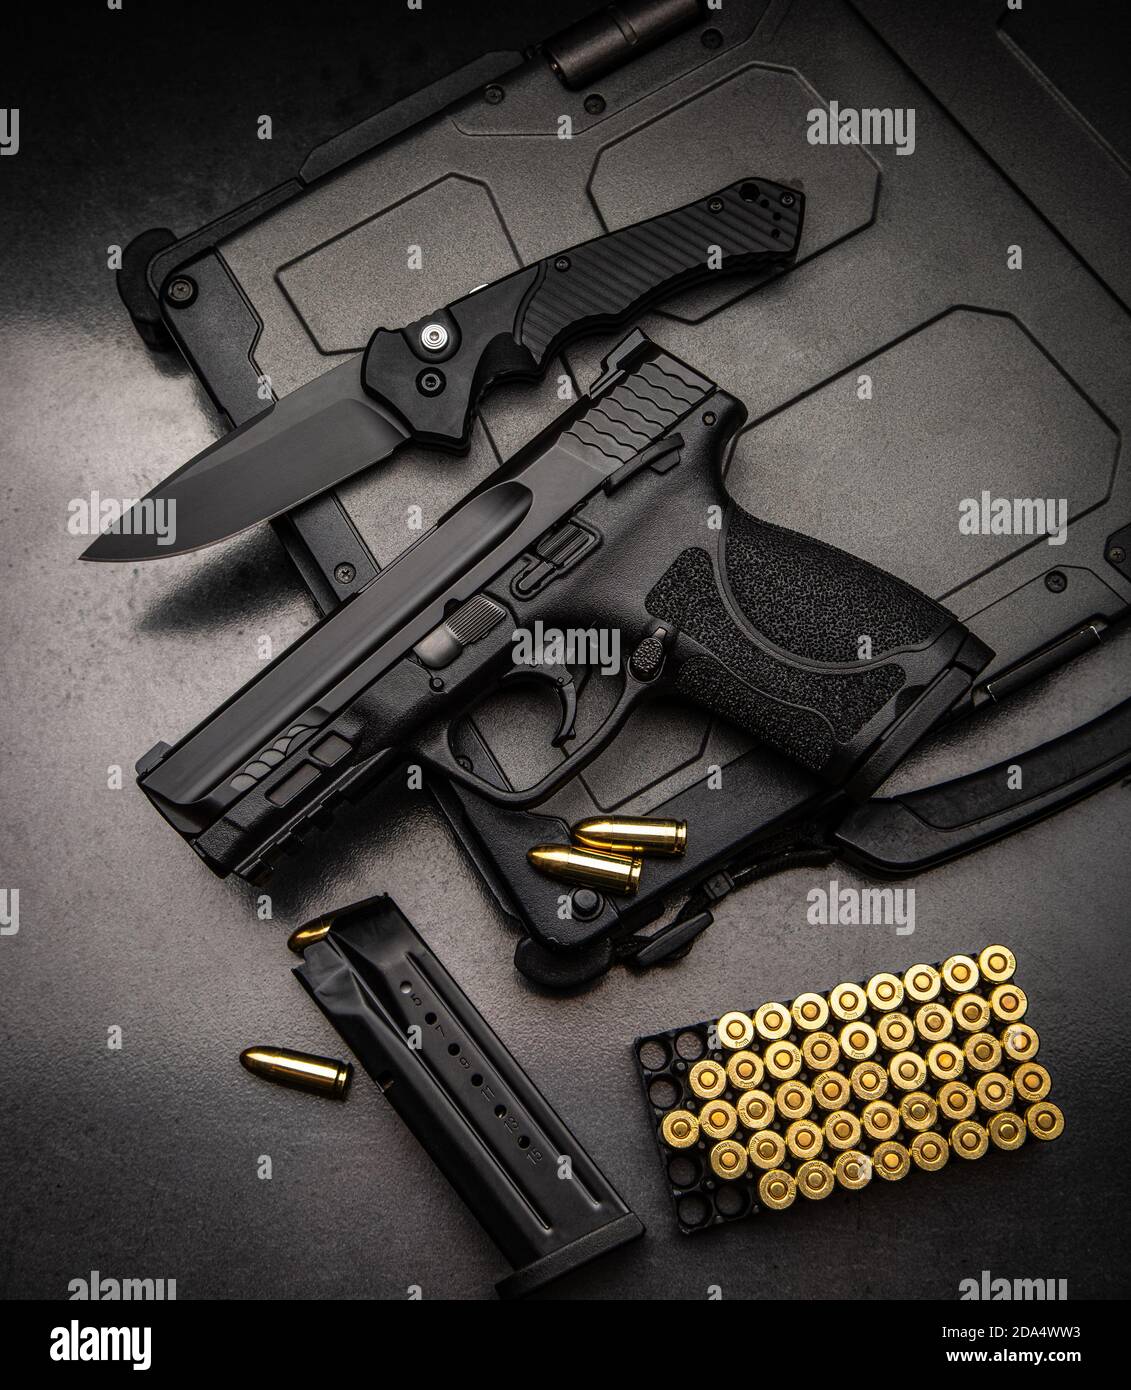 A pistol, cartridges for it and a folding knife on a dark background.  Self-defense and survival kit. Compact edged weapons and firearms Stock  Photo - Alamy